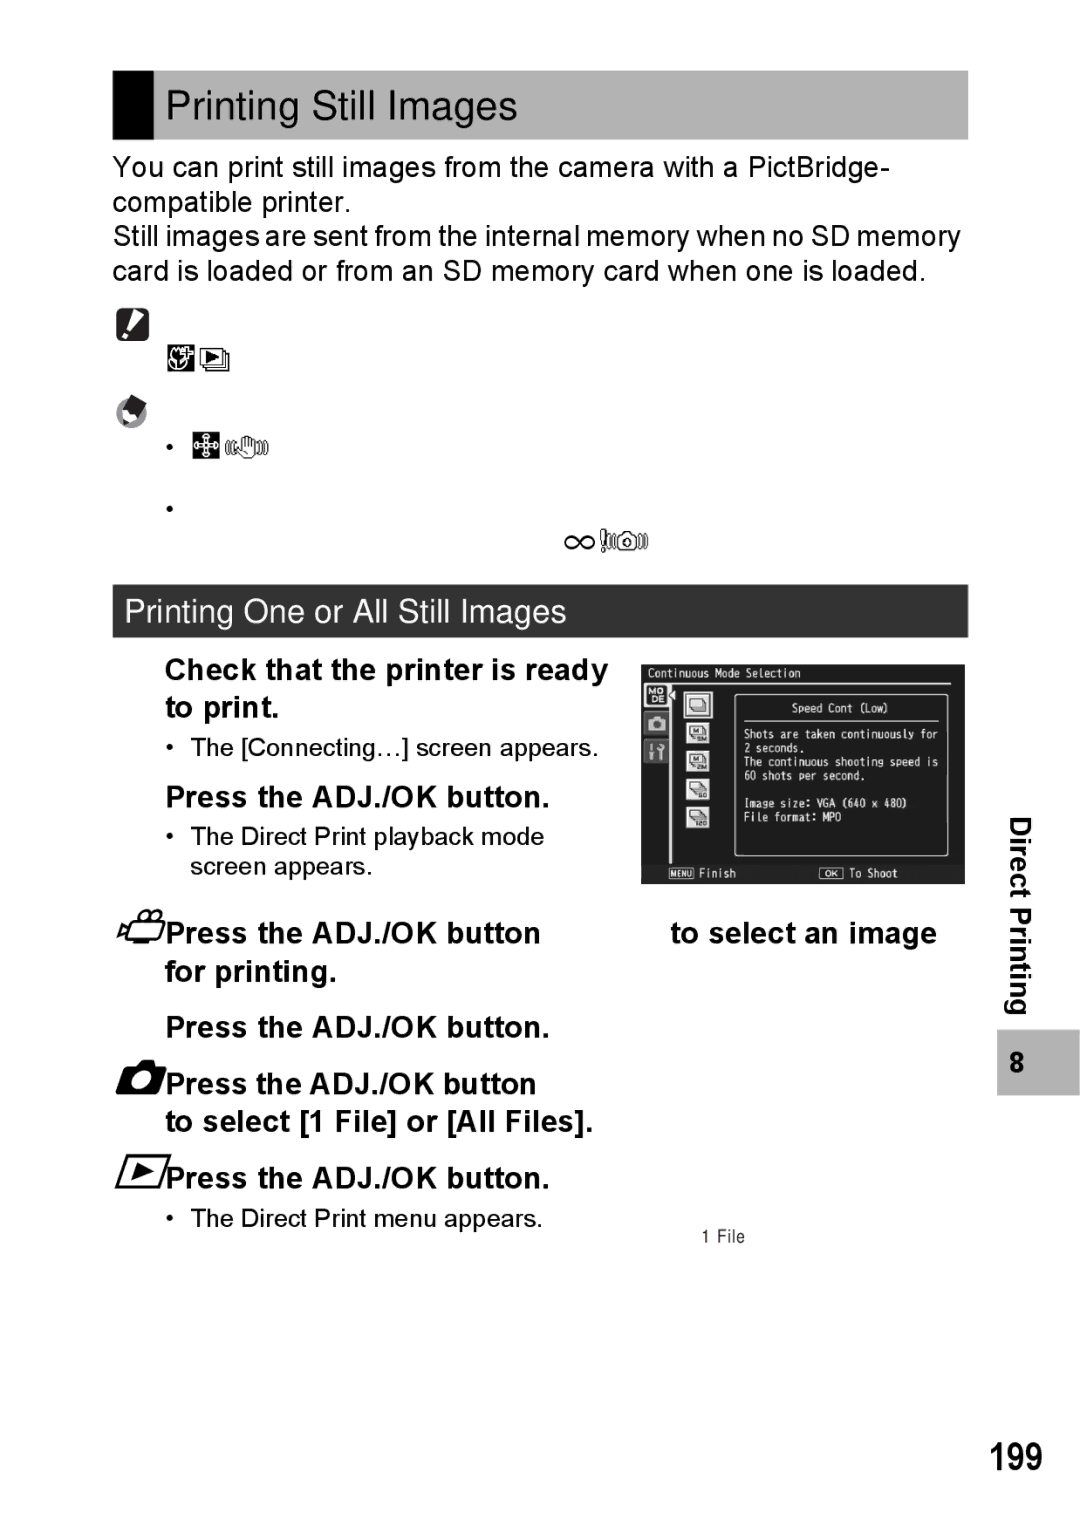 Samsung CX2 manual Printing Still Images, 199, Printing One or All Still Images, Check that the printer is ready to print 